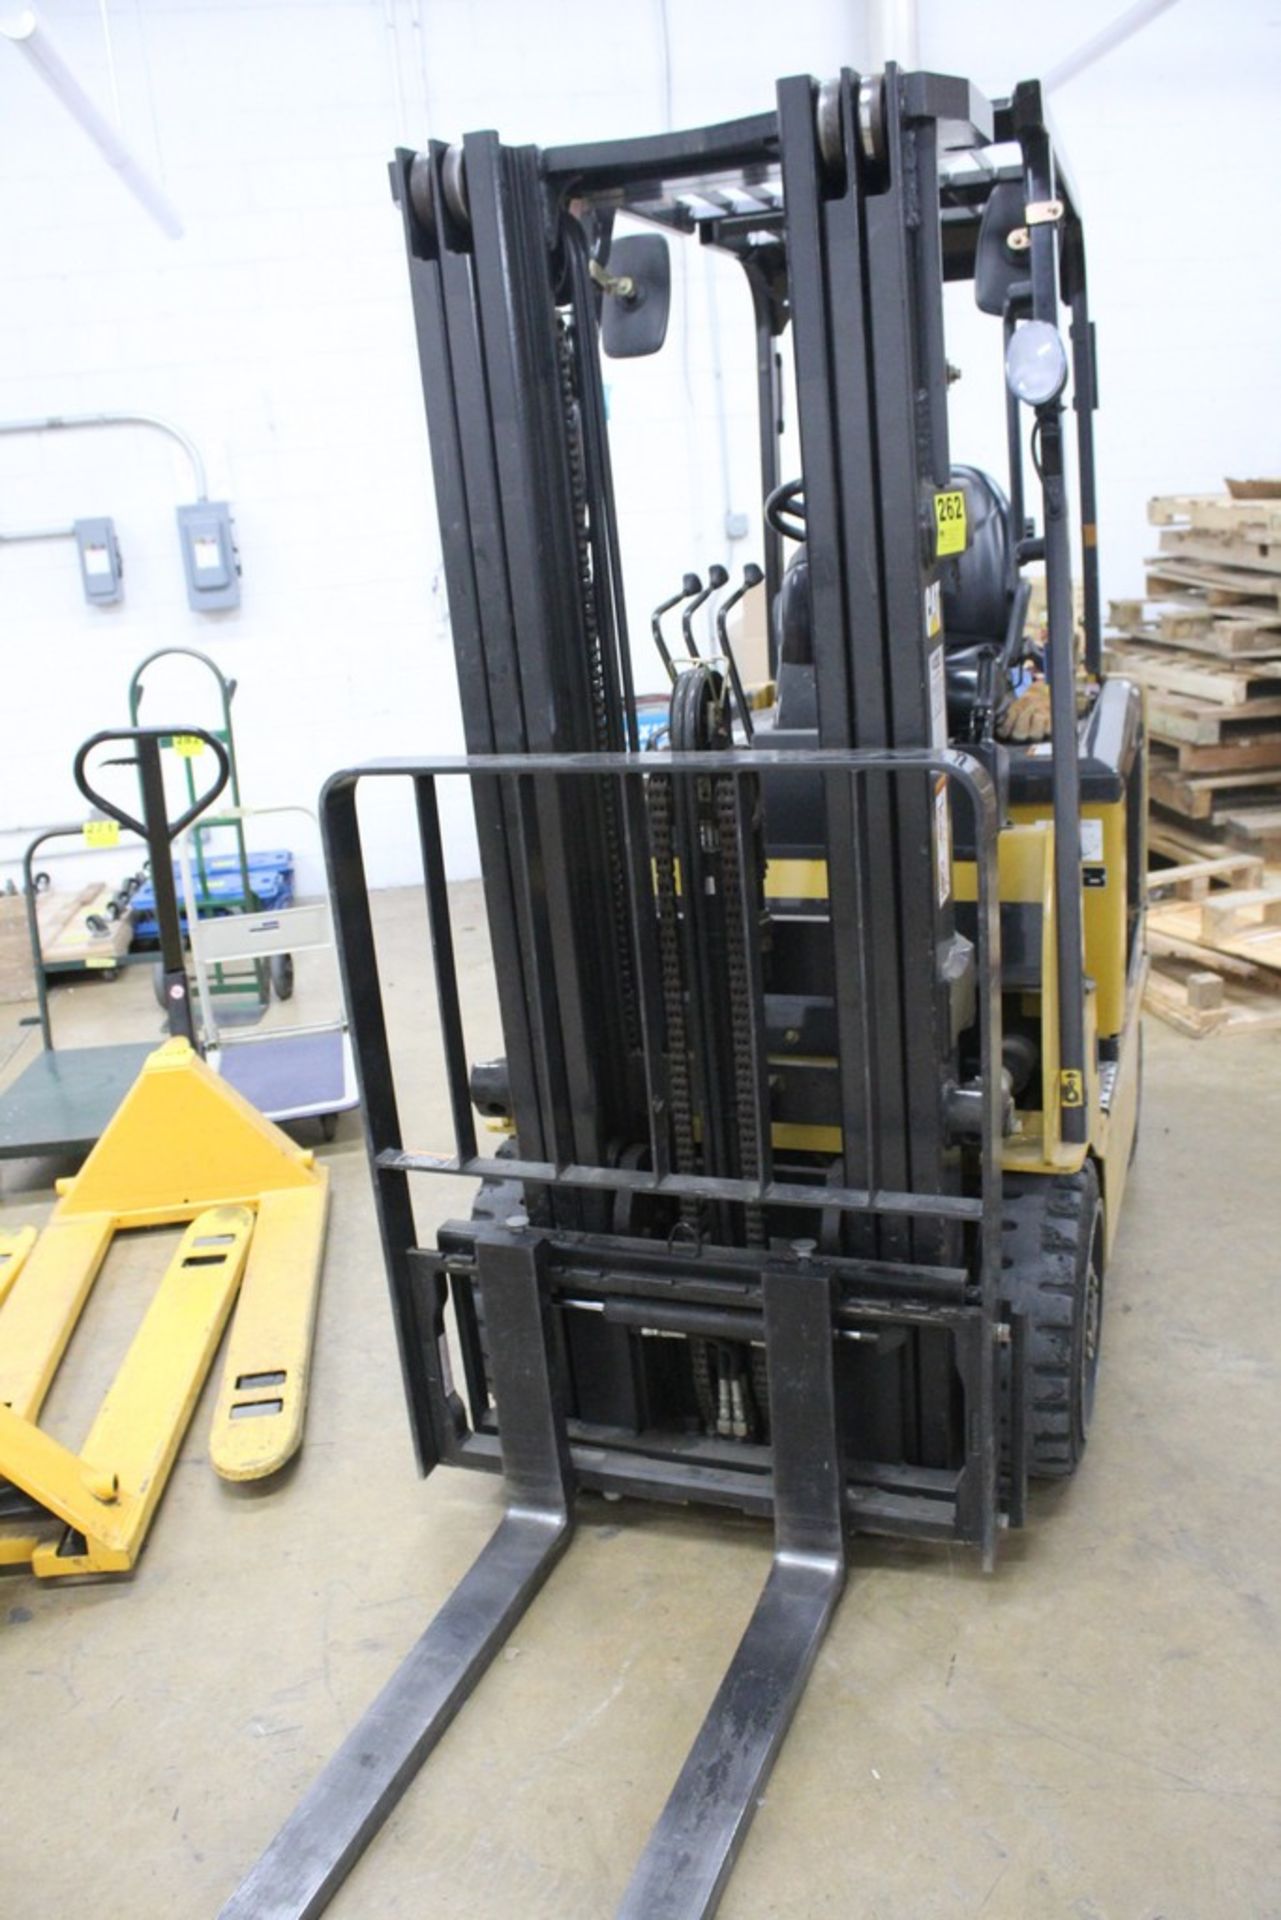 CATERPILLAR MODEL E5000 ELECTRIC FORKLIFT, 3,198 HOURS ON METER, LIFTING CAP. 4,500 LBS., 188" MAX - Image 6 of 12